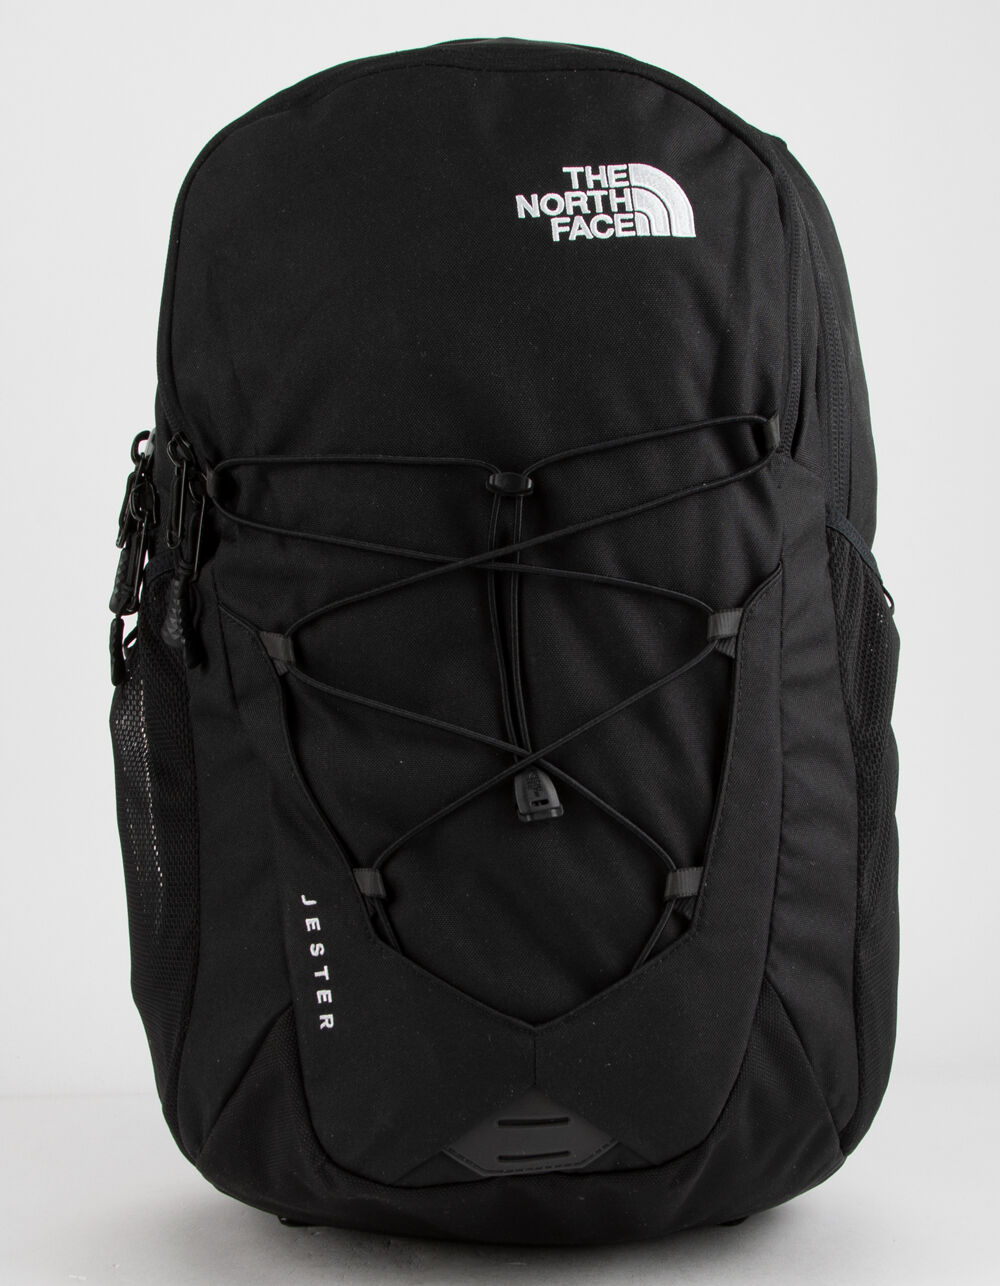 The North Face Jester Backpack, TNF Black, One Size | PiU Price It Up